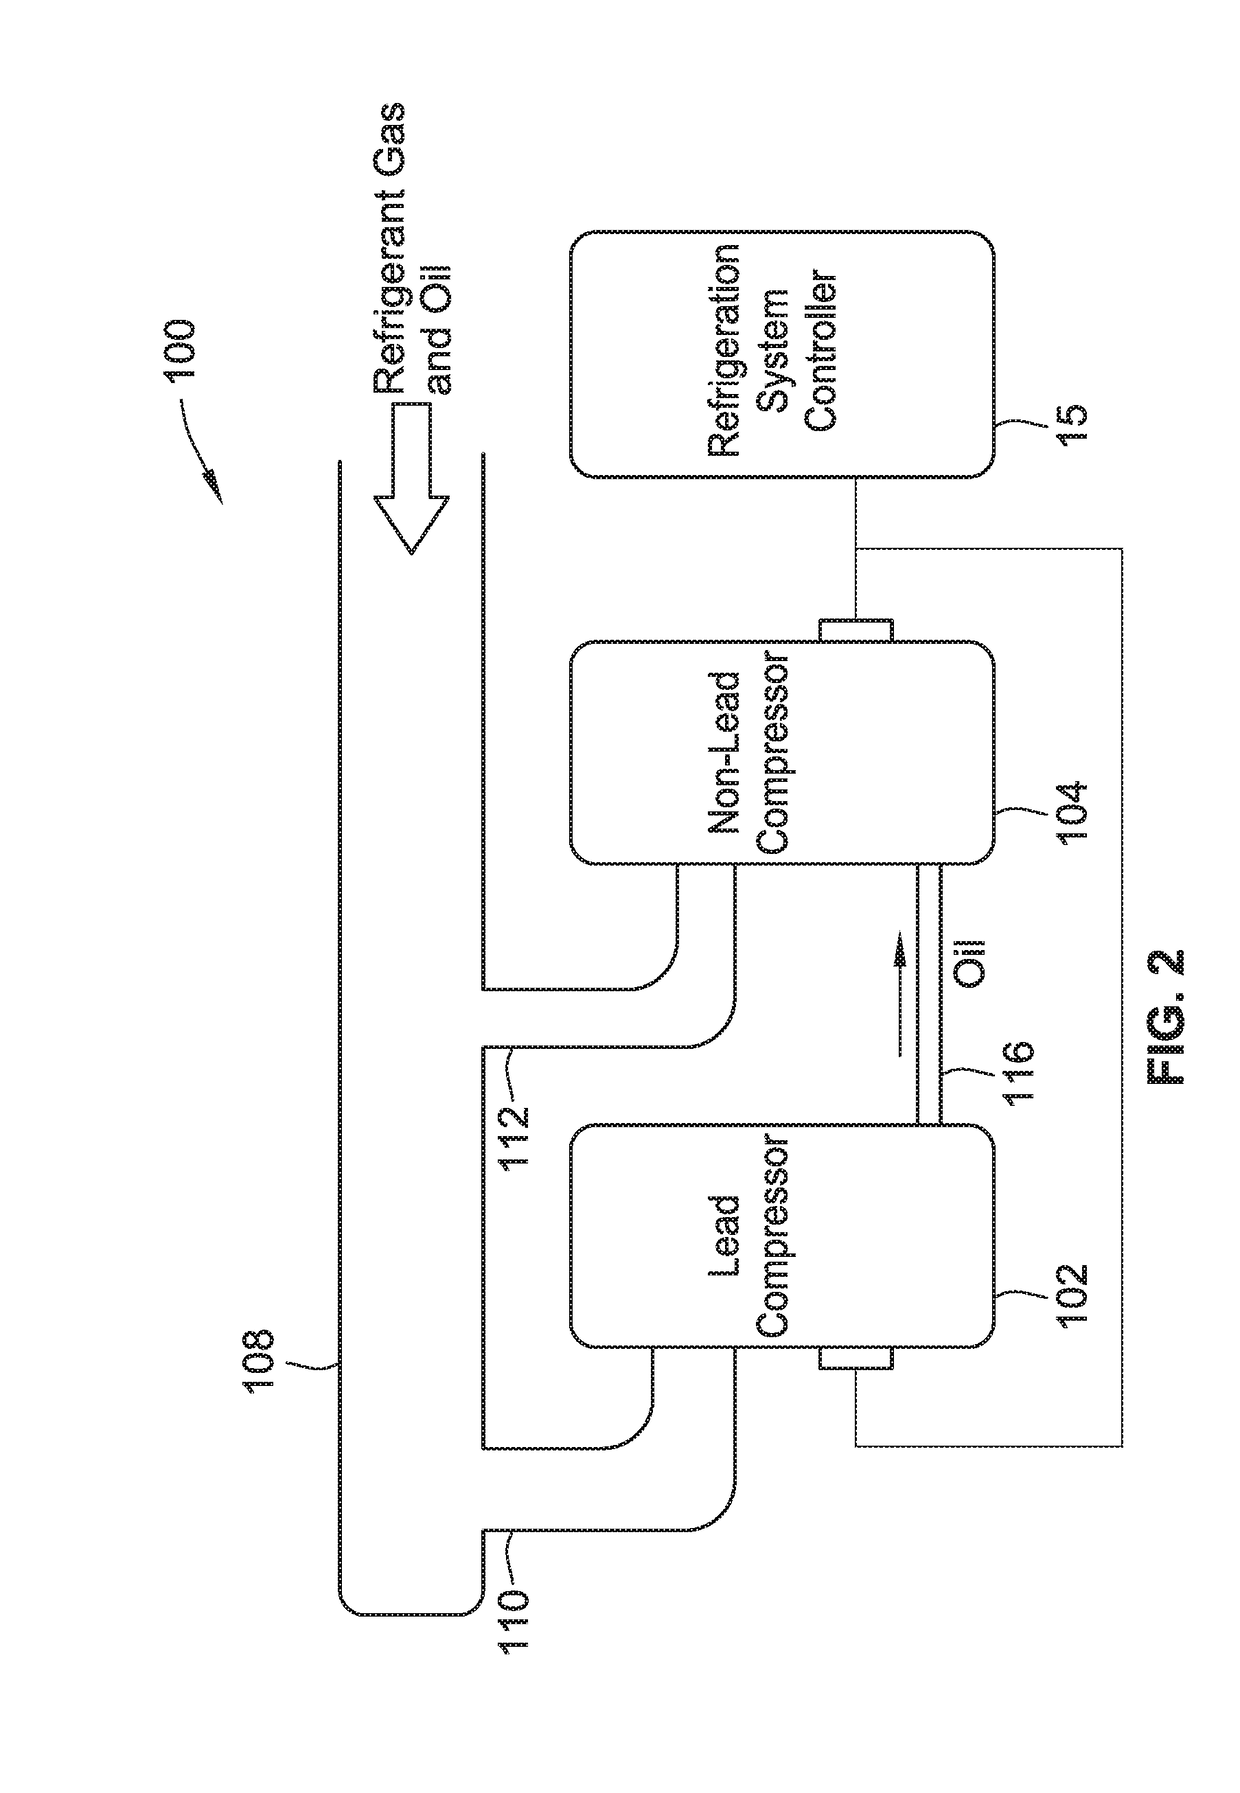 Oil distribution in multiple-compressor systems utilizing variable speed